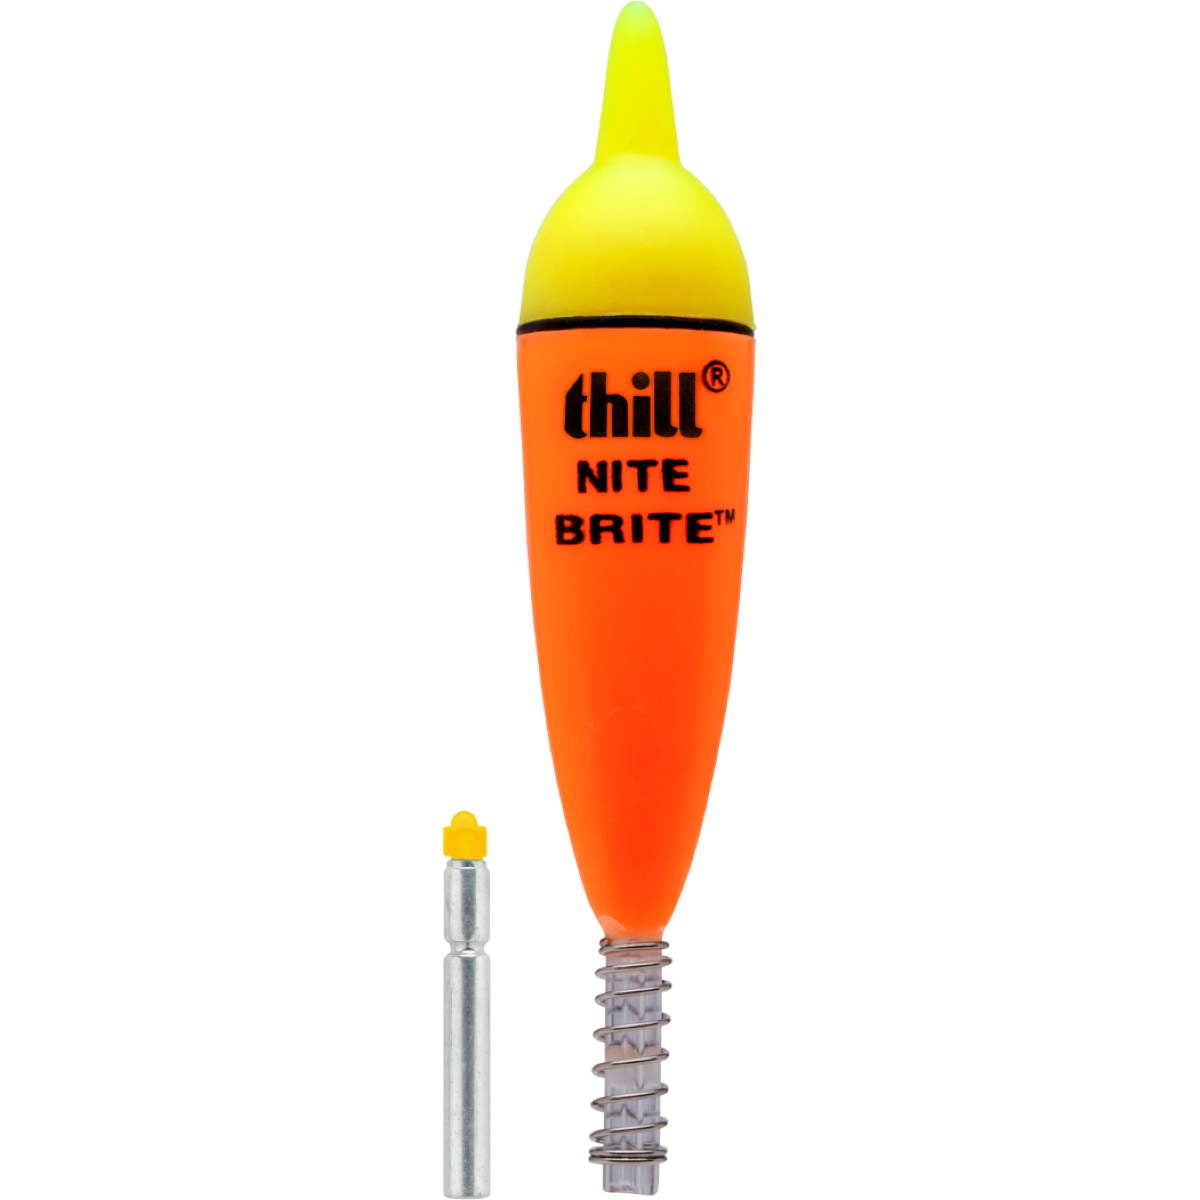 Photo of Thill Nite Brite Float for sale at United Tackle Shops.